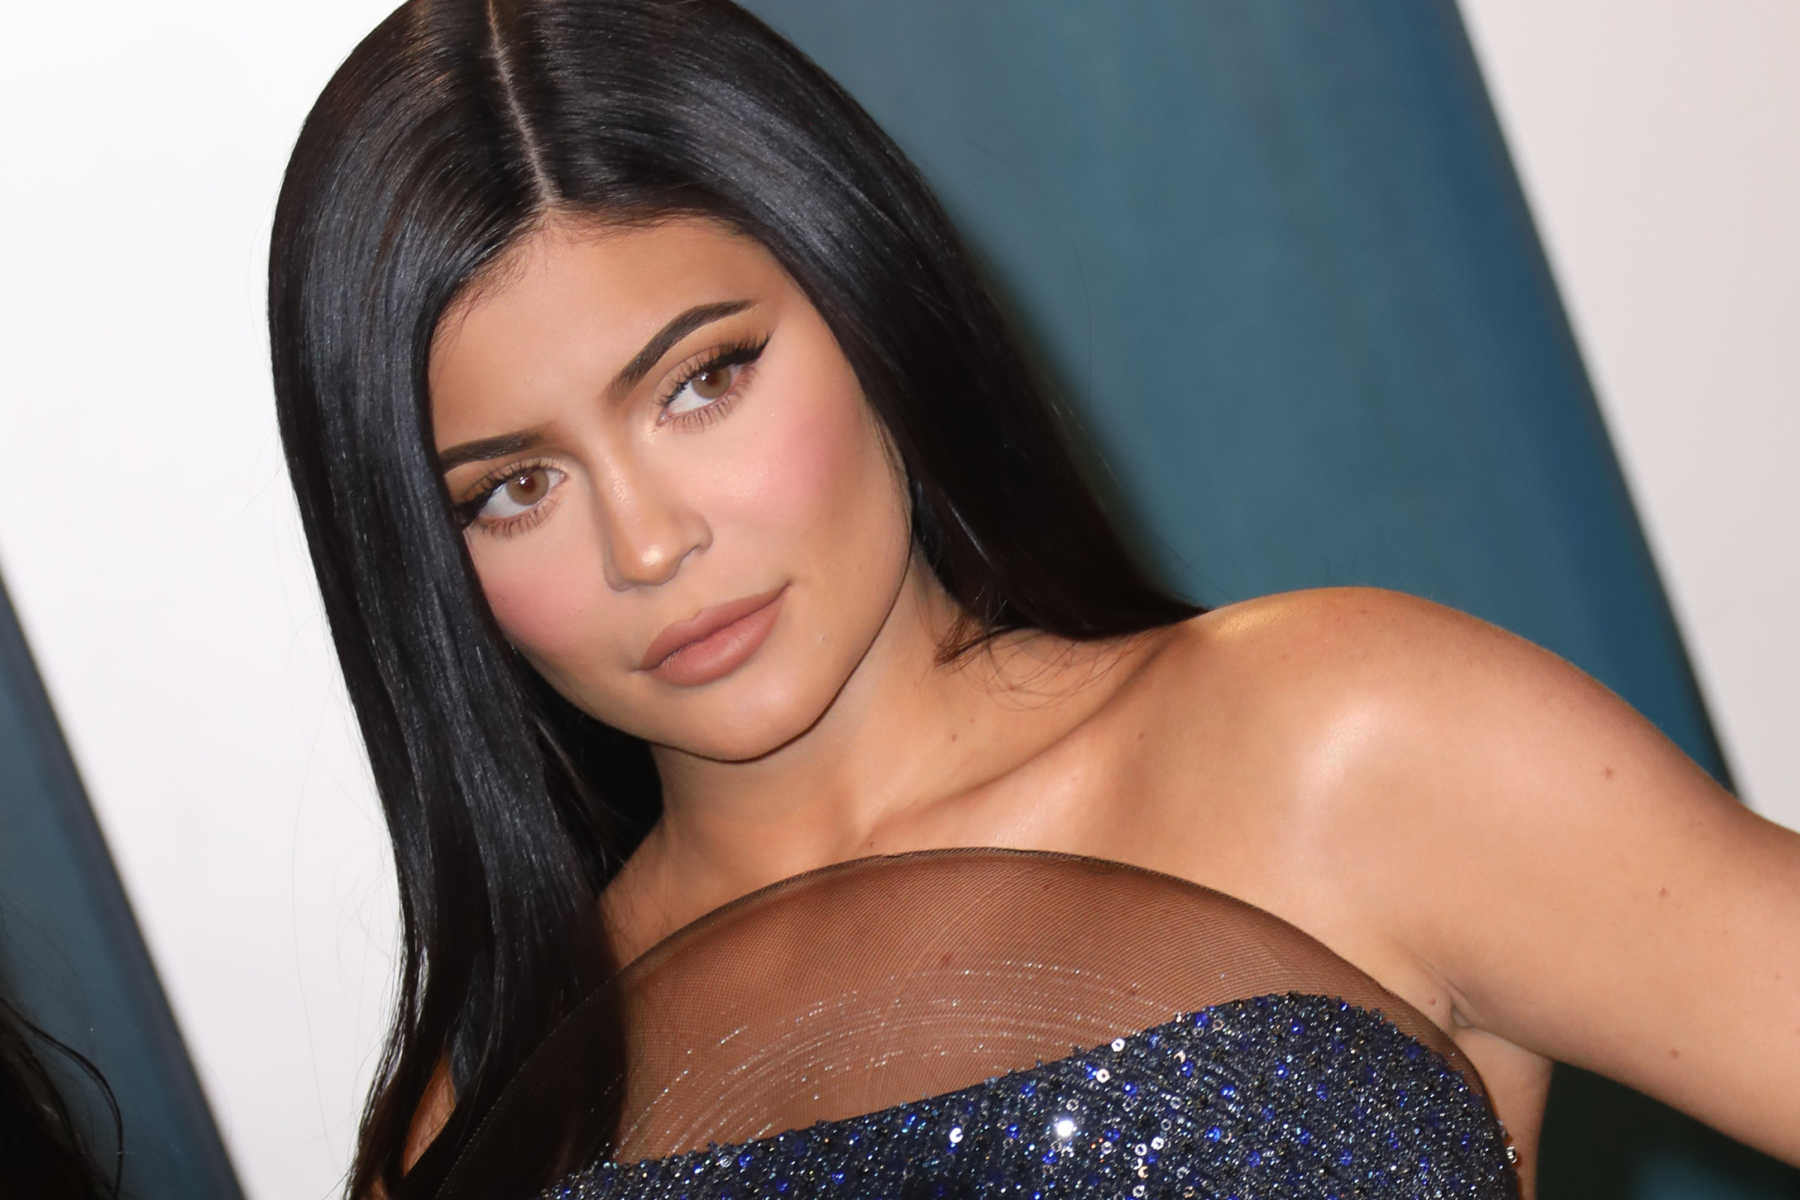 Kylie Jenner shows off baby son's Nike sneakers with jaw-dropping price tag  after being slammed for 'flaunting' wealth